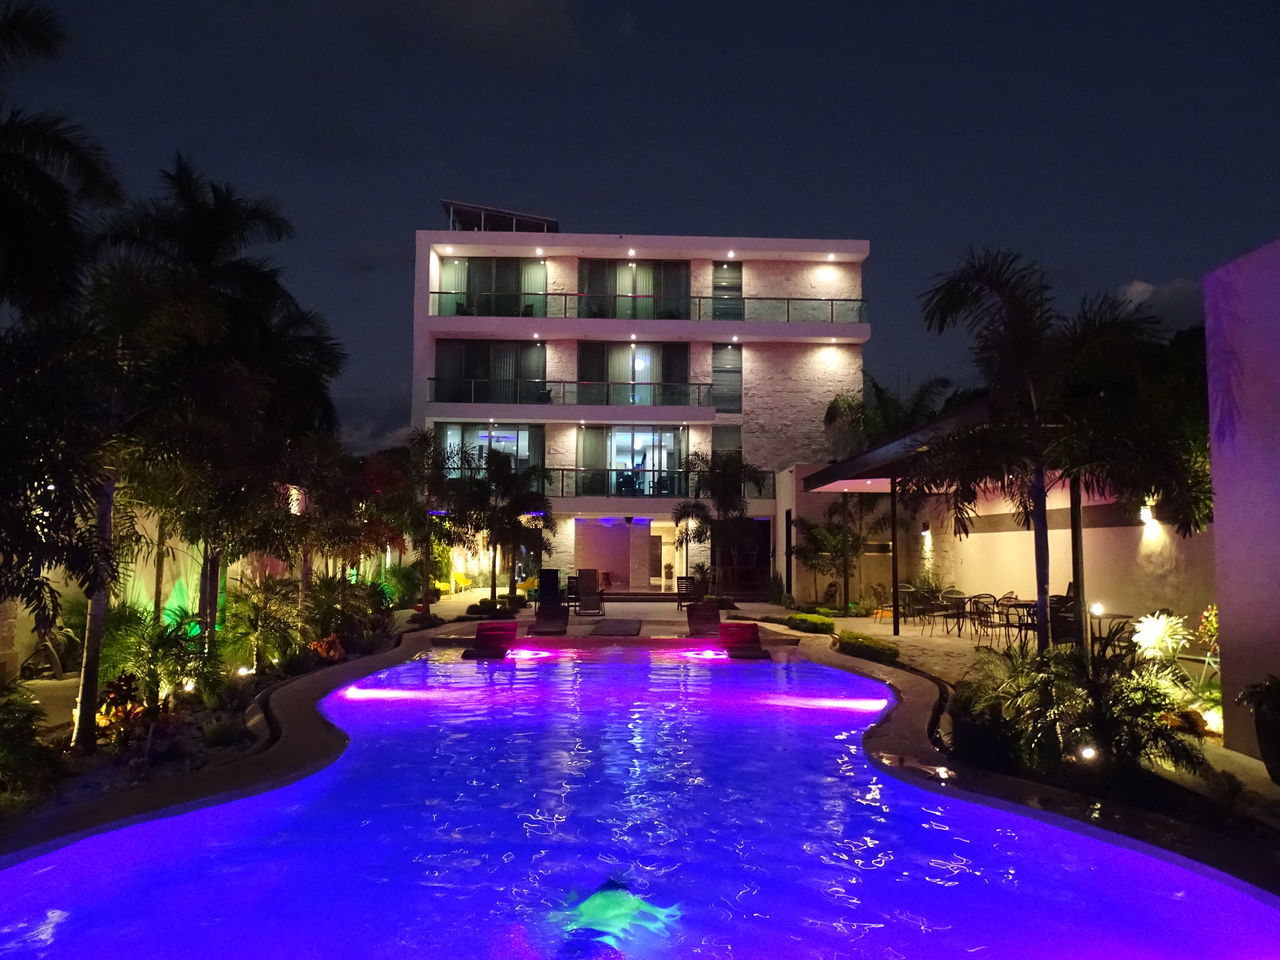 night, illuminated, tree, pool, swimming pool, architecture, building exterior, water, built structure, plant, nature, no people, palm tree, outdoors, tropical climate, building, hotel, lighting equipment, dusk, luxury